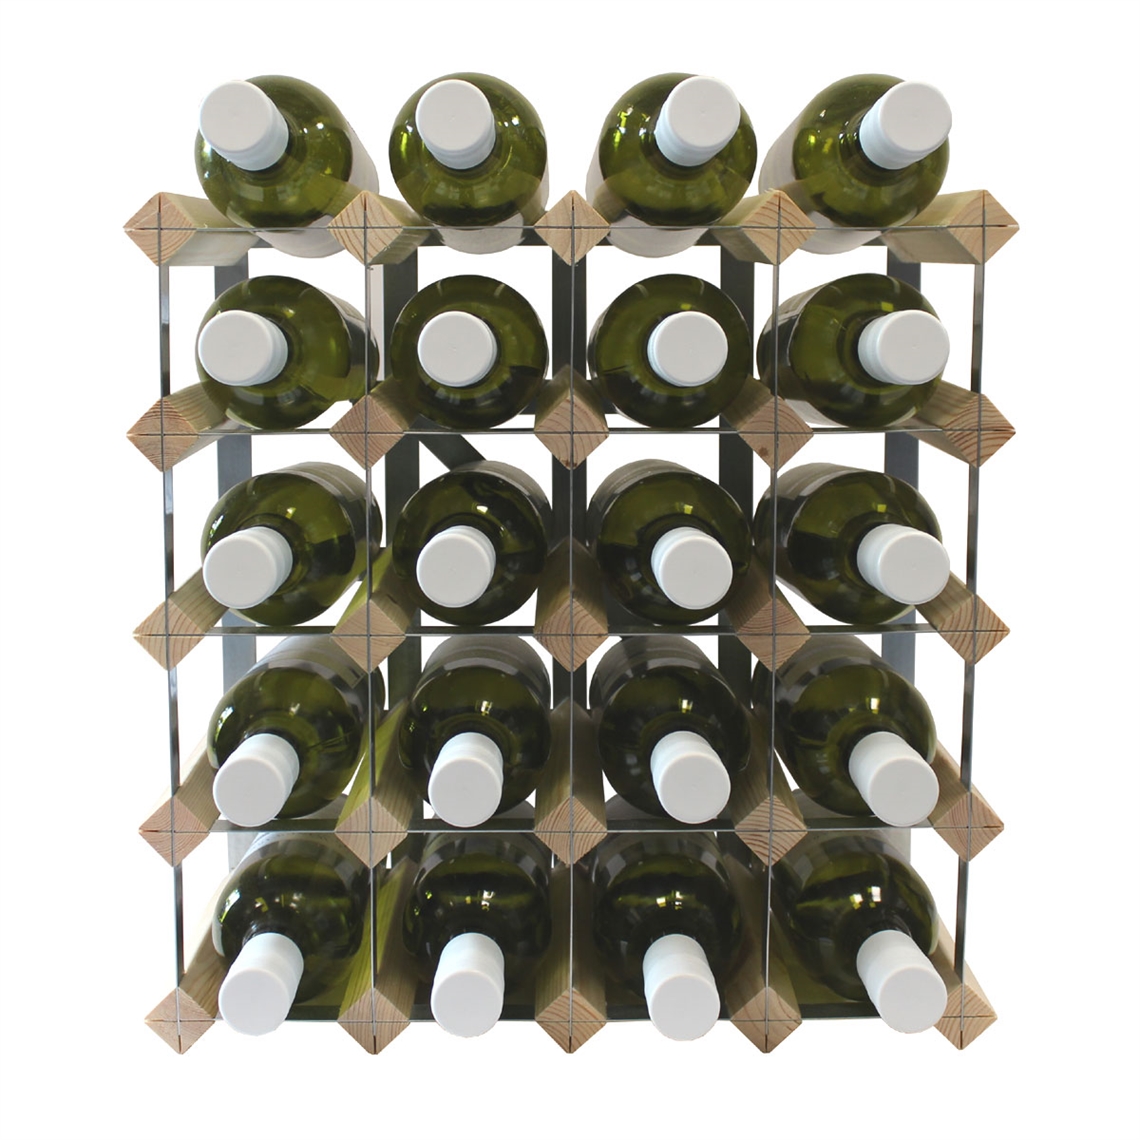 View more wine rack kits from our Assembled Wine Racks range